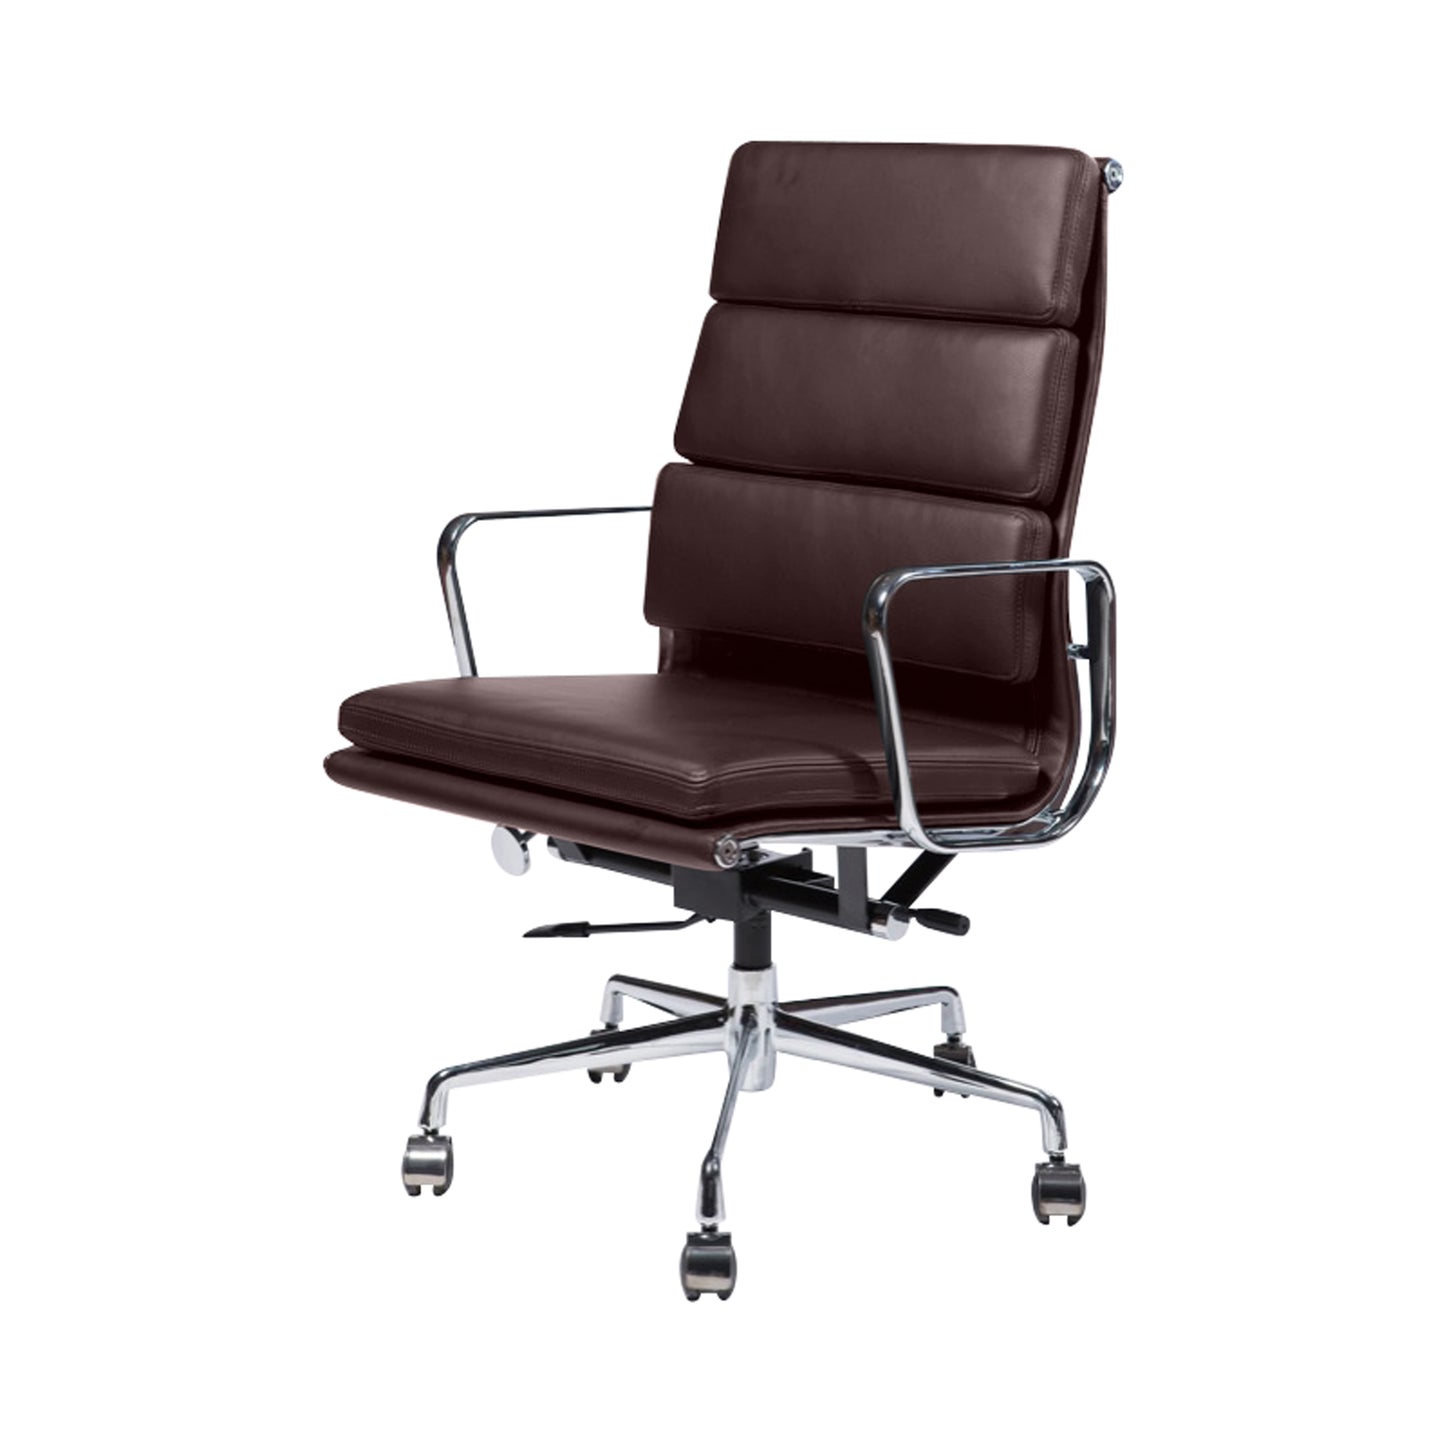 Soft pad chair aluminium style |  Chocolate Leather | Side